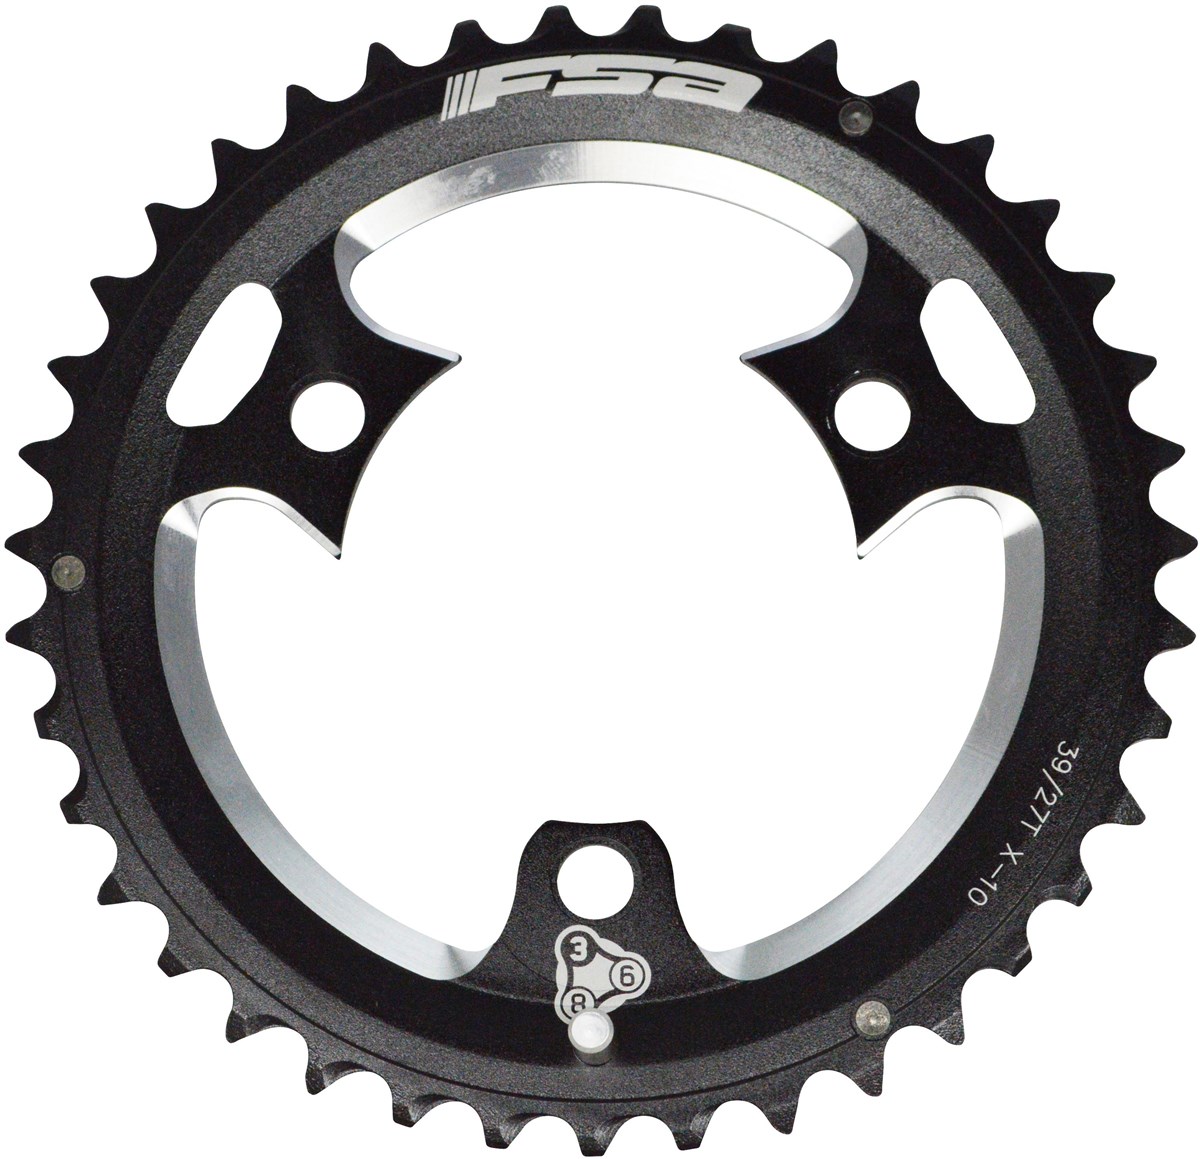 FSA Stamped 386 MTB Chainring (X10, 86BCD) product image